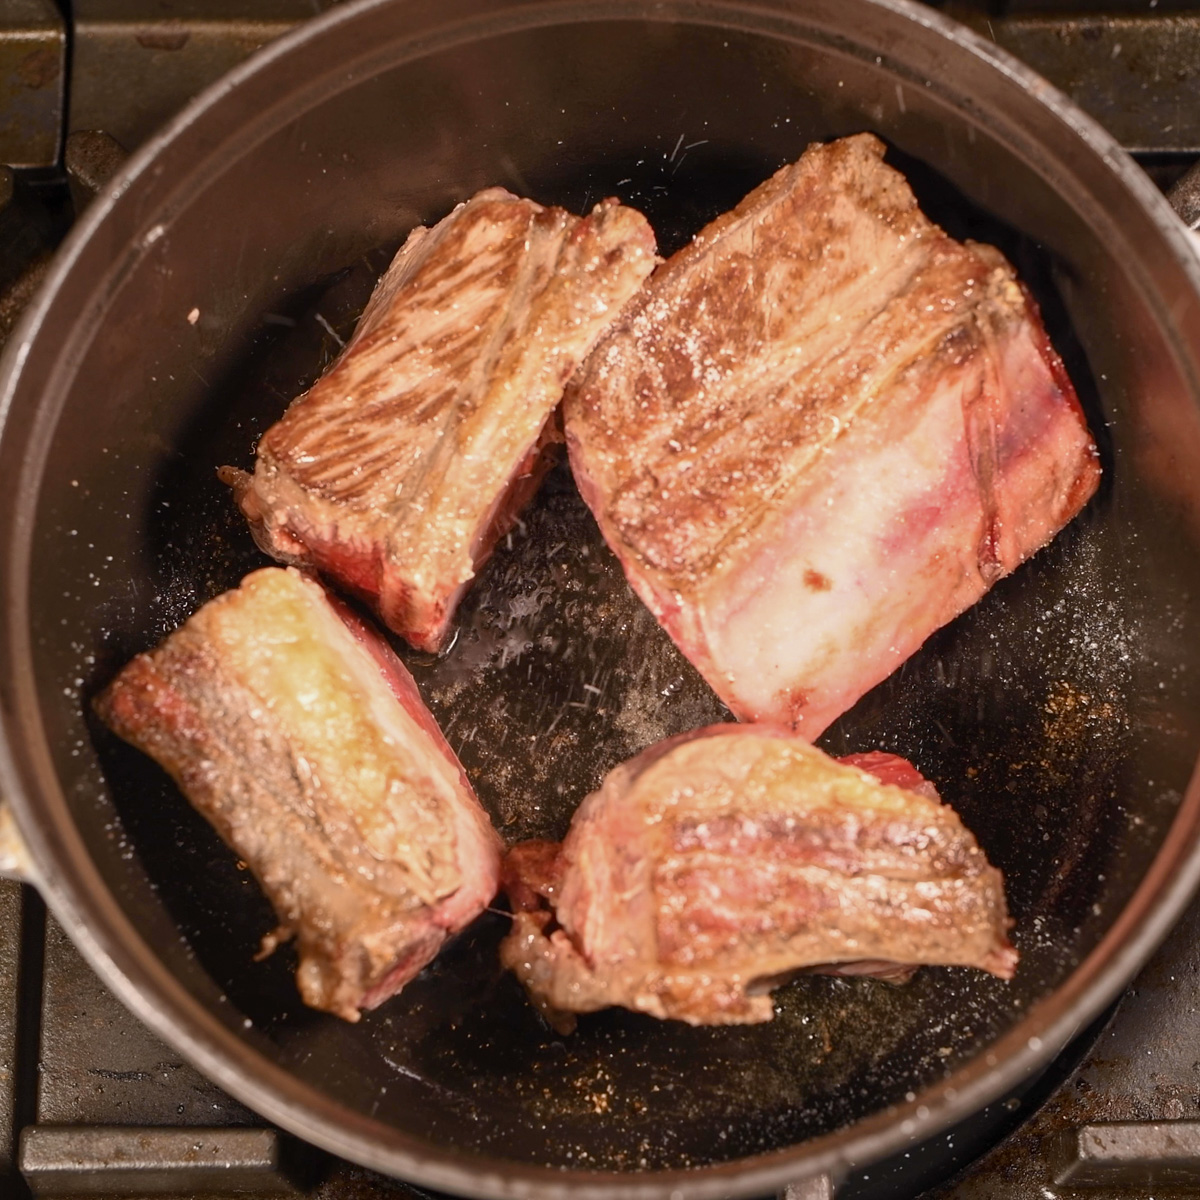 Sear short ribs on all sides.